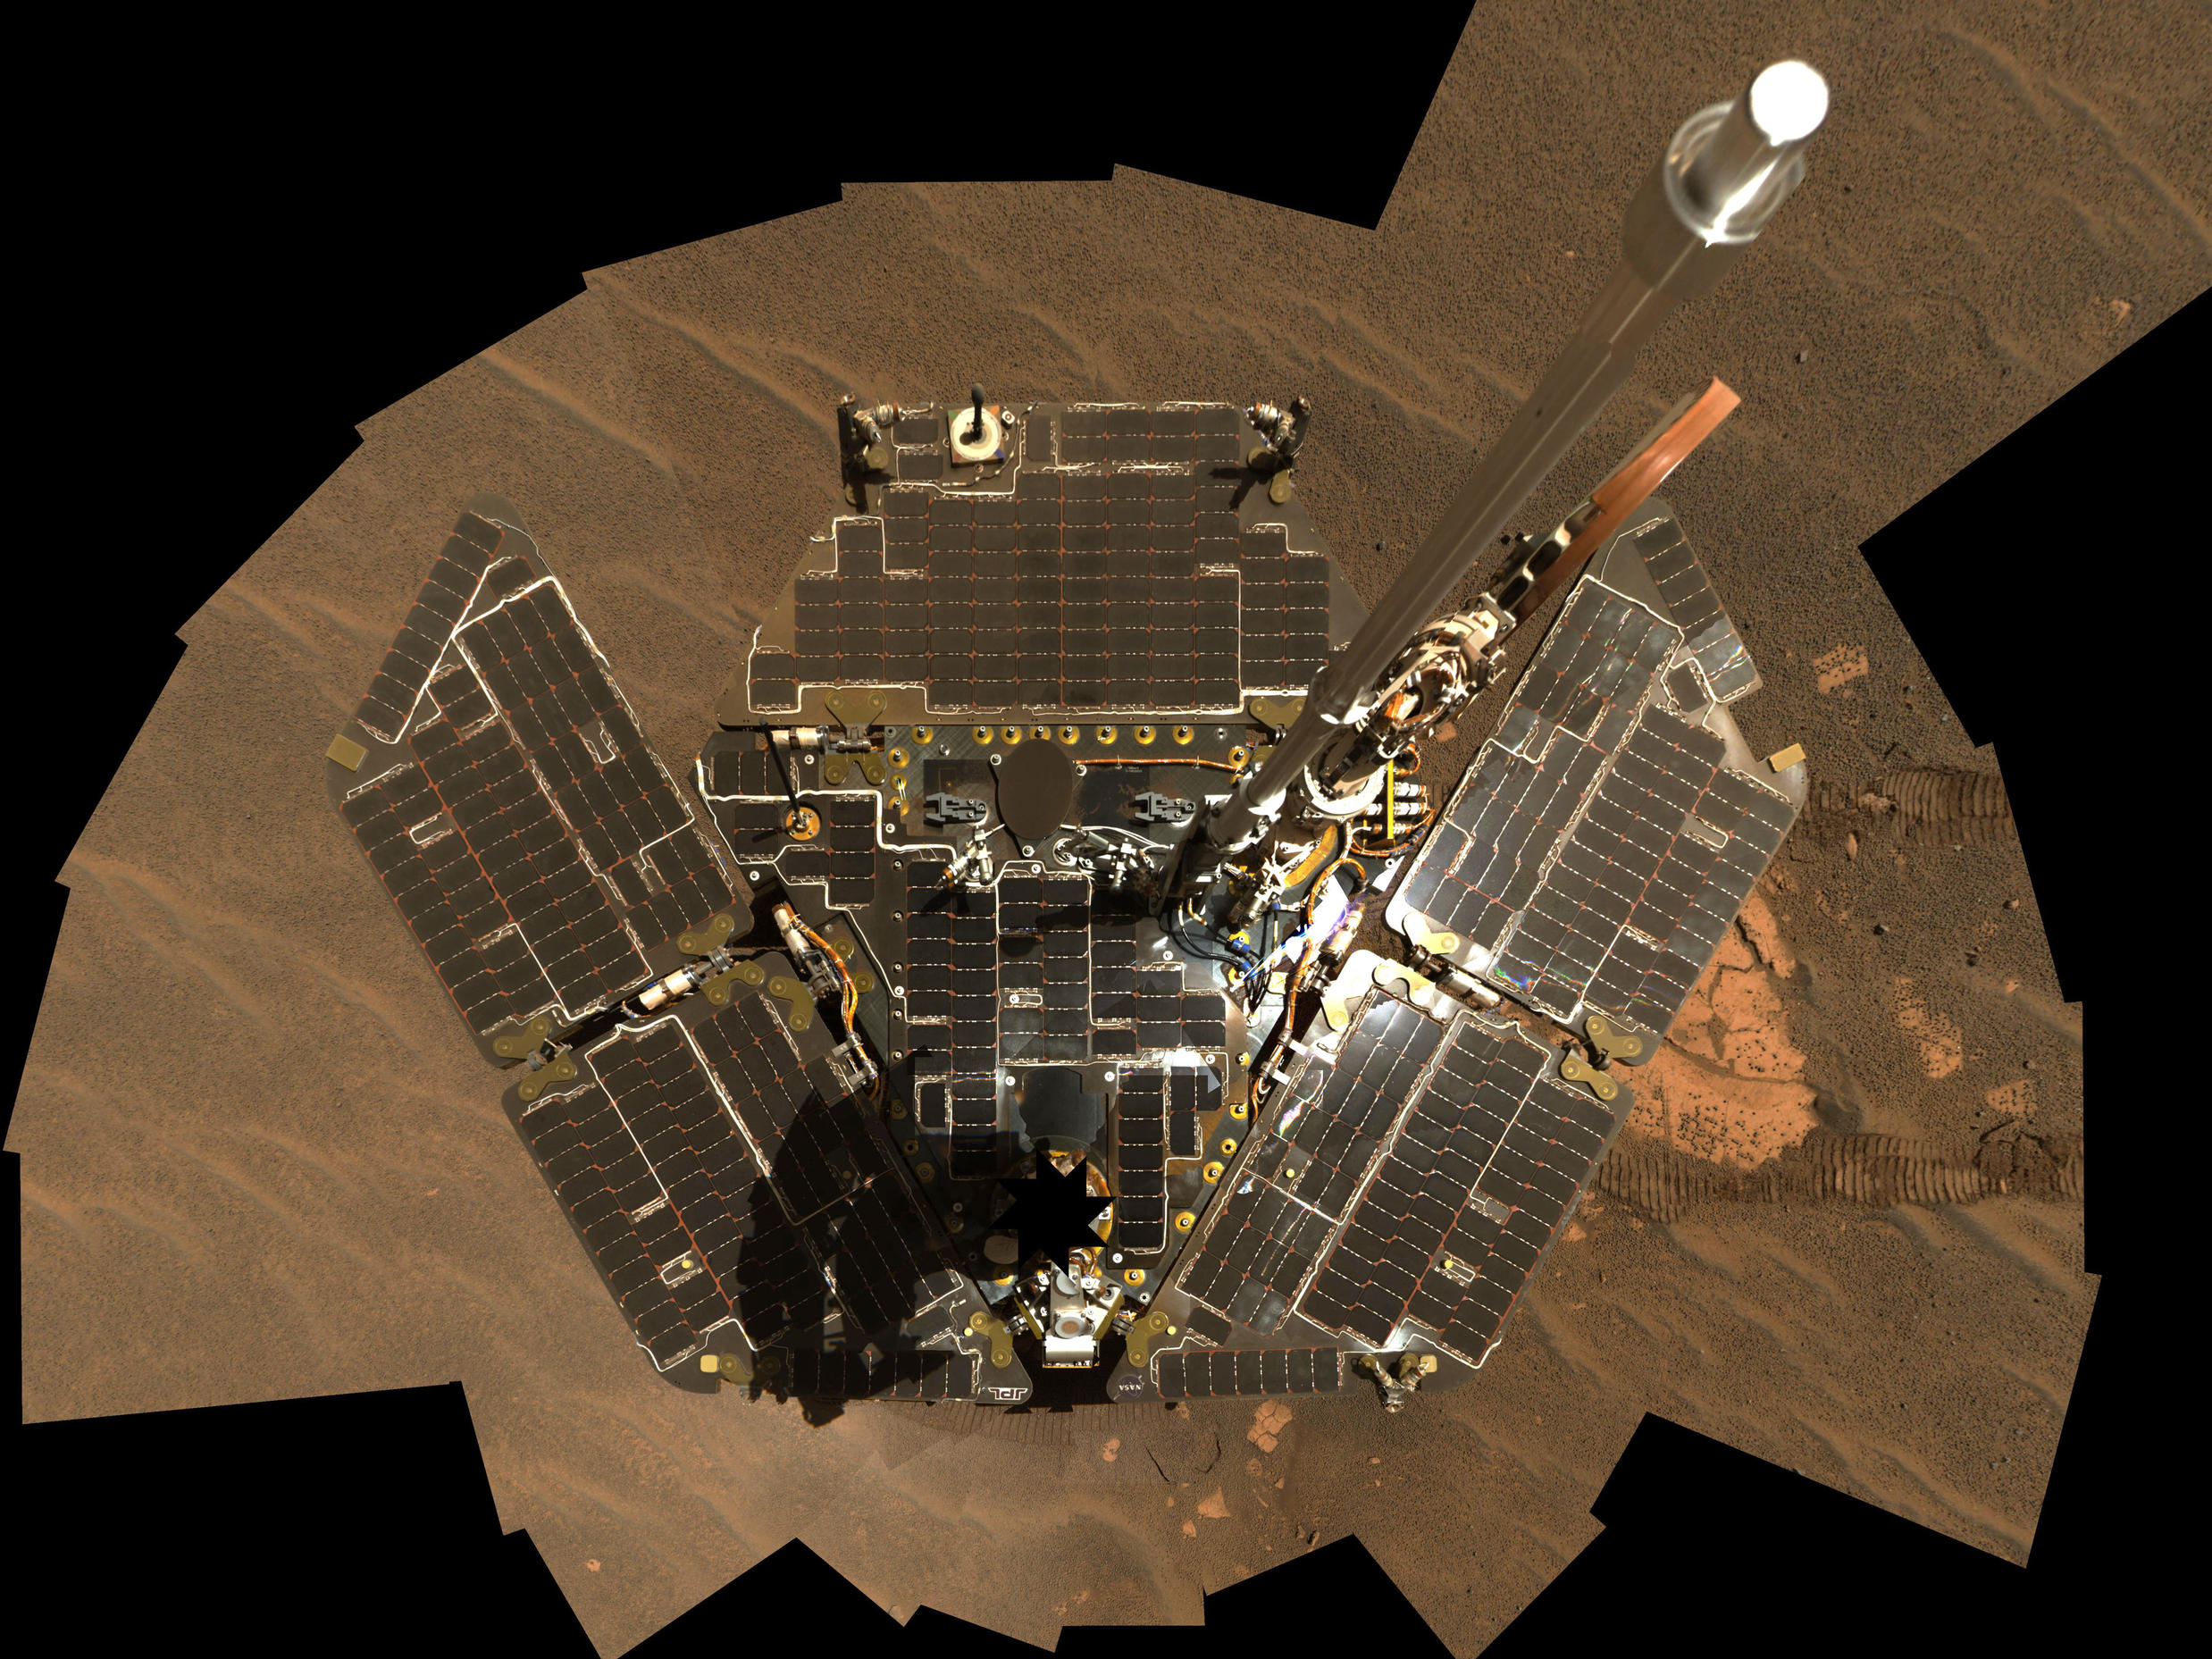 Opportunity used its panoramic camera to take the images combined into this mosaic view of the rover.